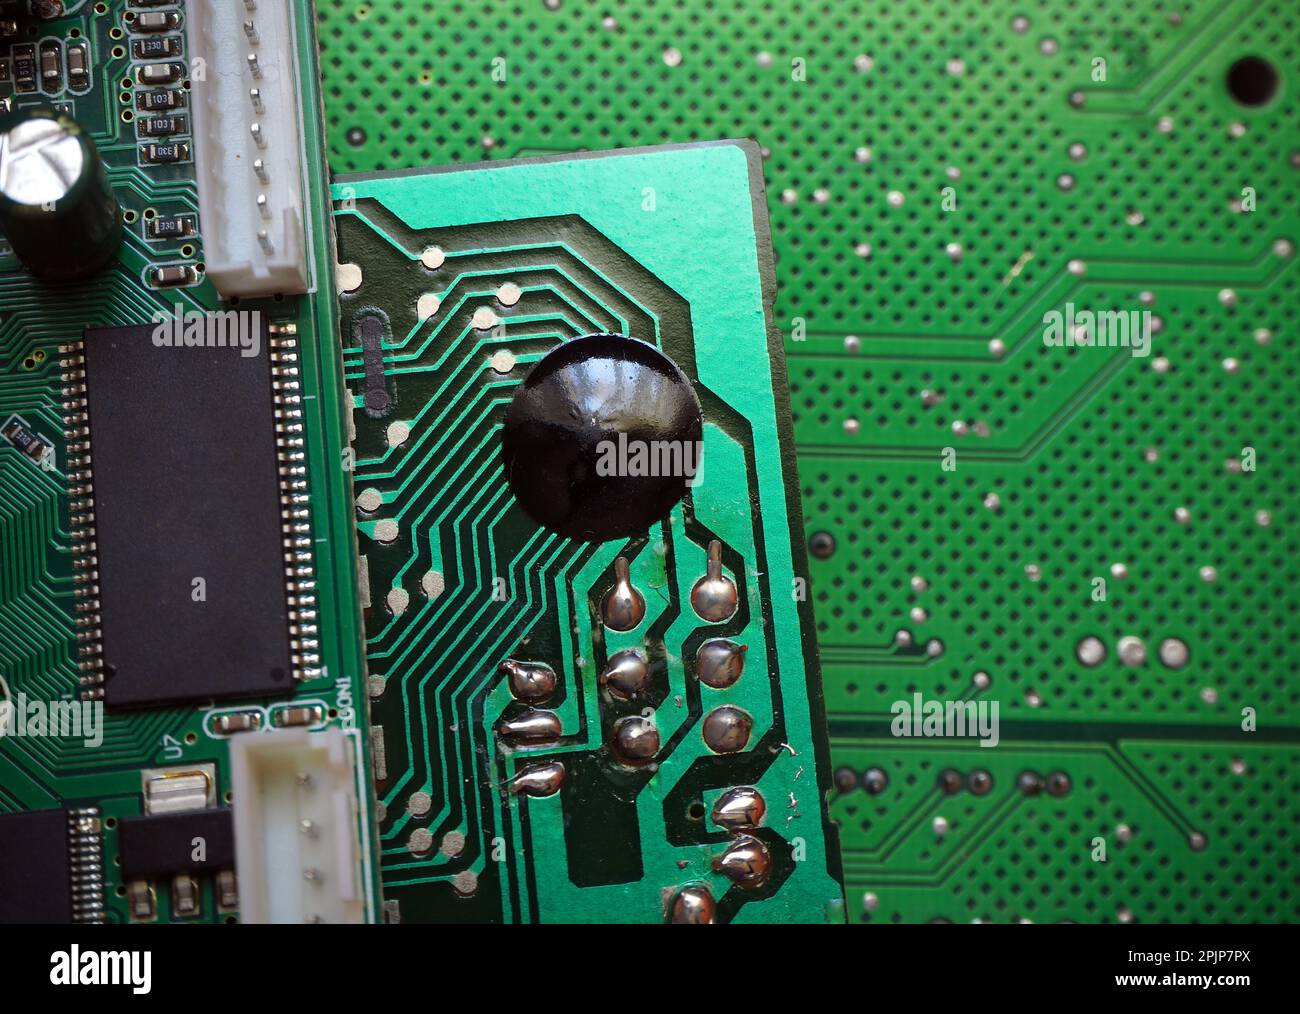 Glob-top technology used in low-end devices. COB, Chip On Board electronic packaging. Circuit board manufacturing background. Stock Photo